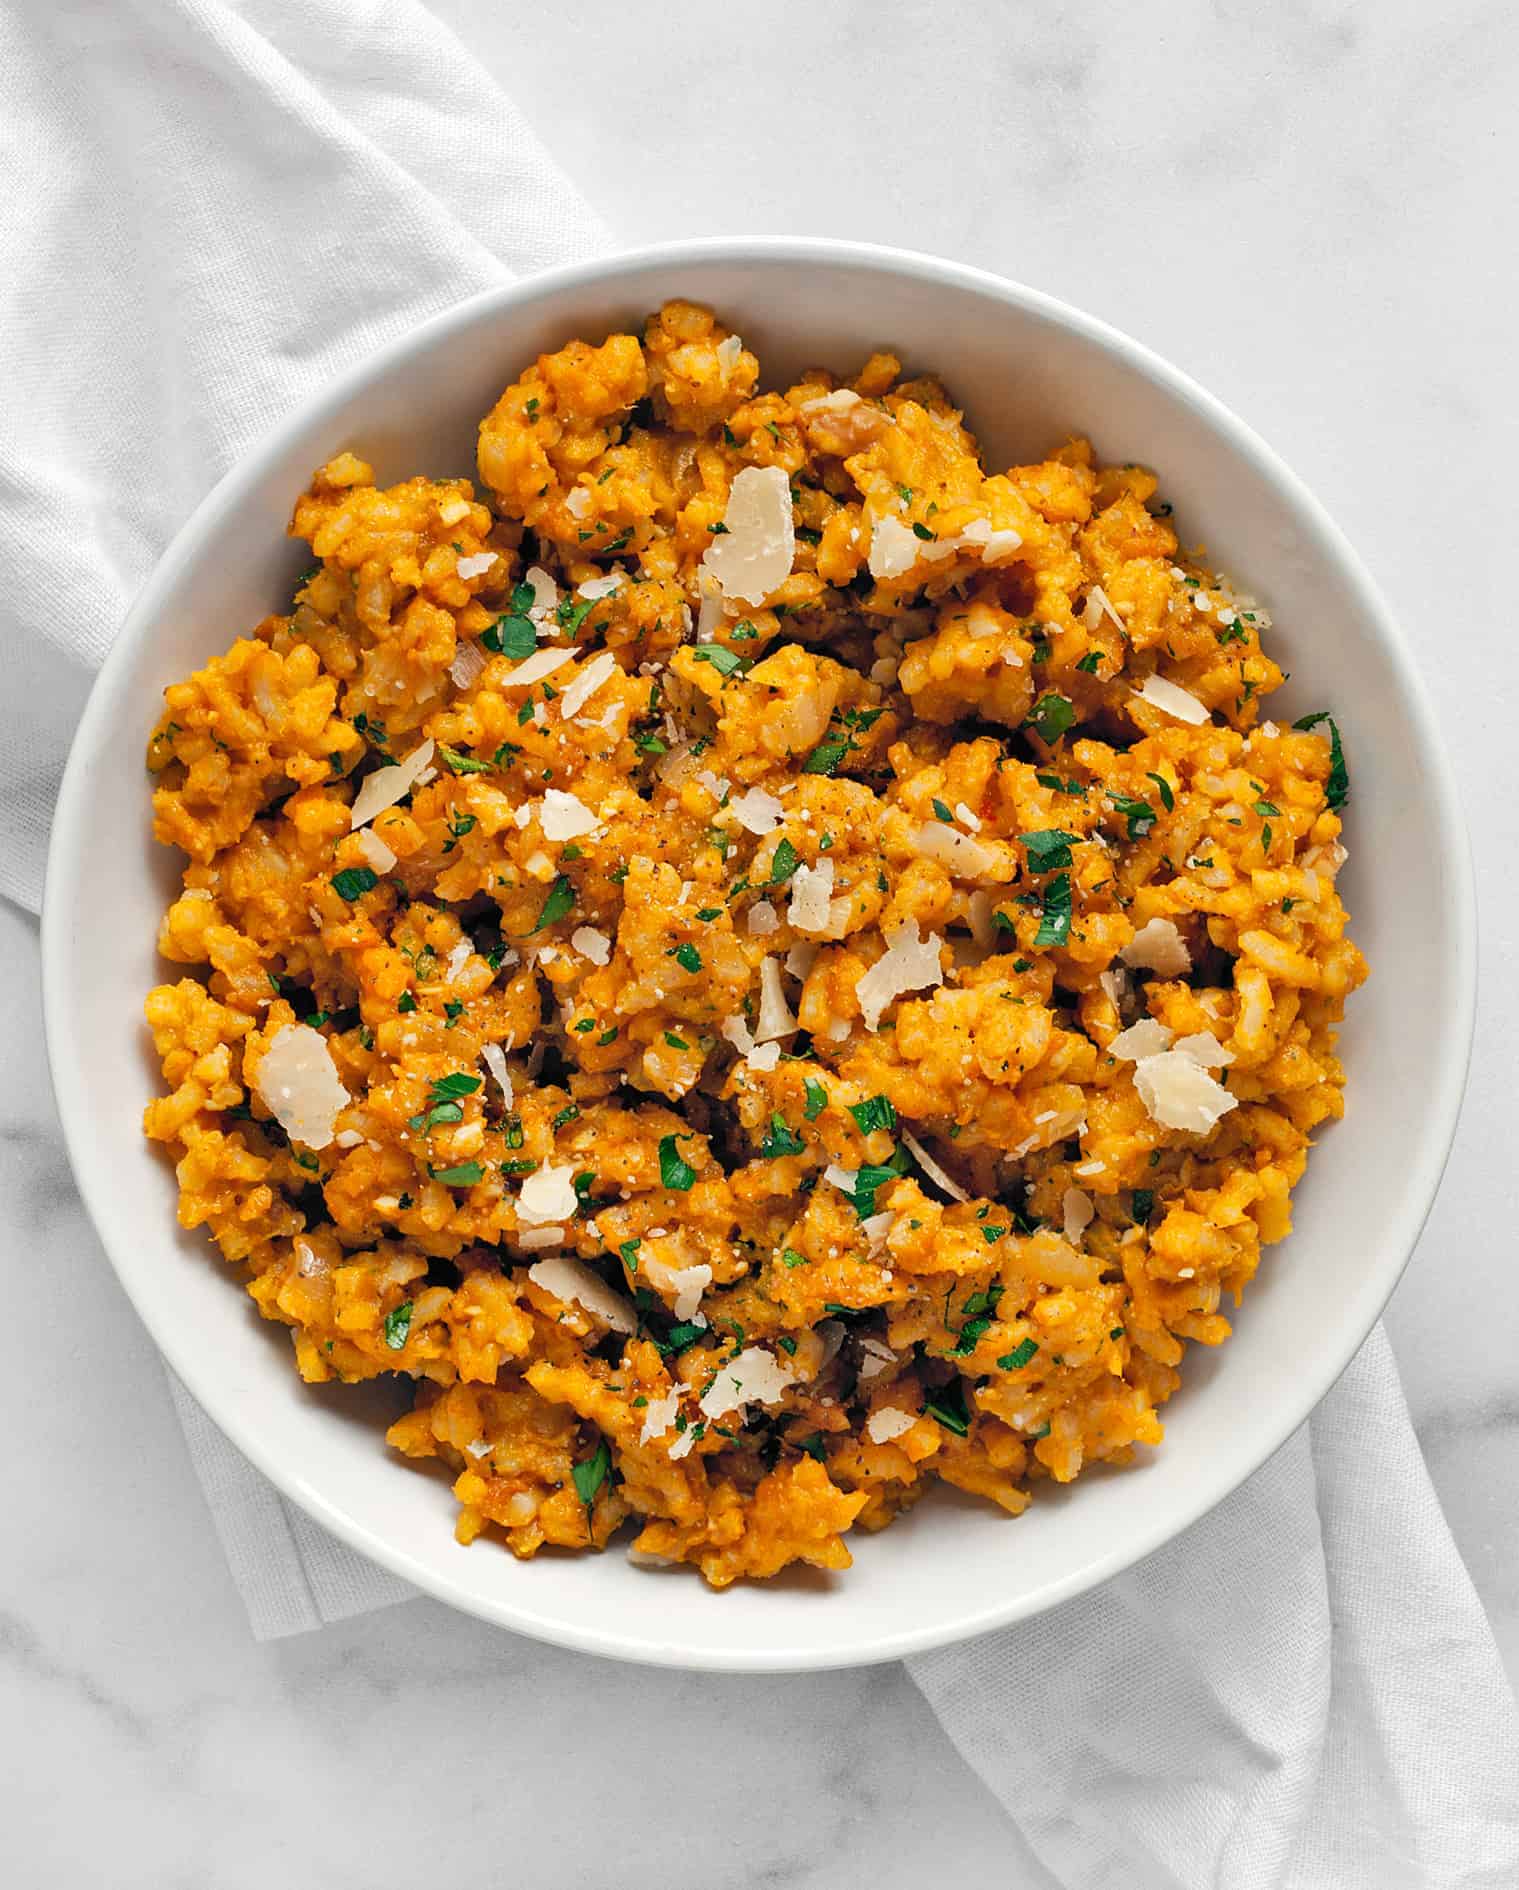 baked-pumpkin-risotto-with-canned-pumpkin-last-ingredient